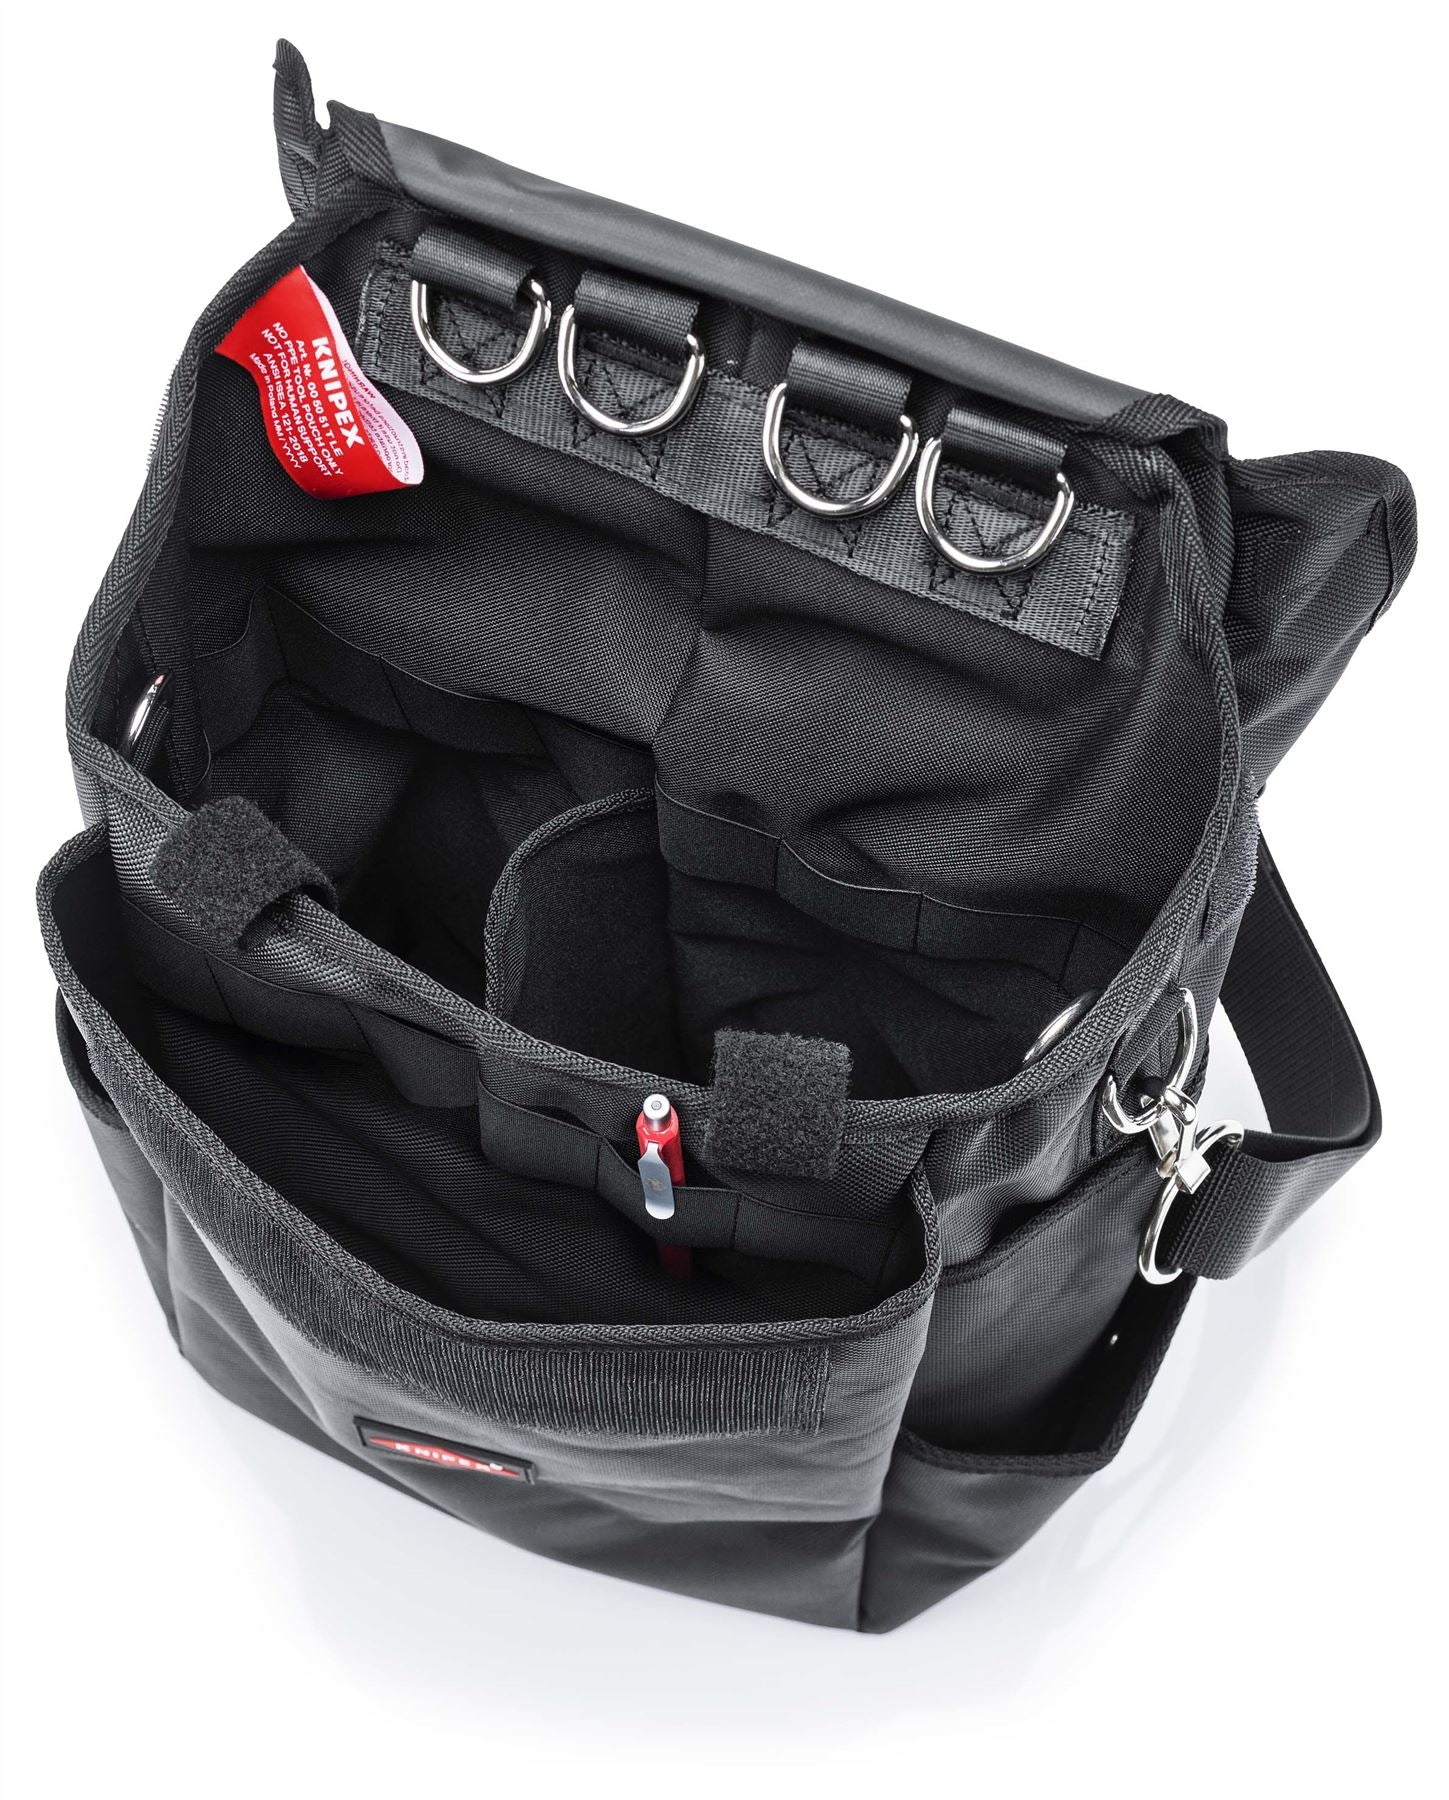 Knipex Tool Bag Case for Working at Heights Large 470 x 250 x 150mm 00 50 51 T LE